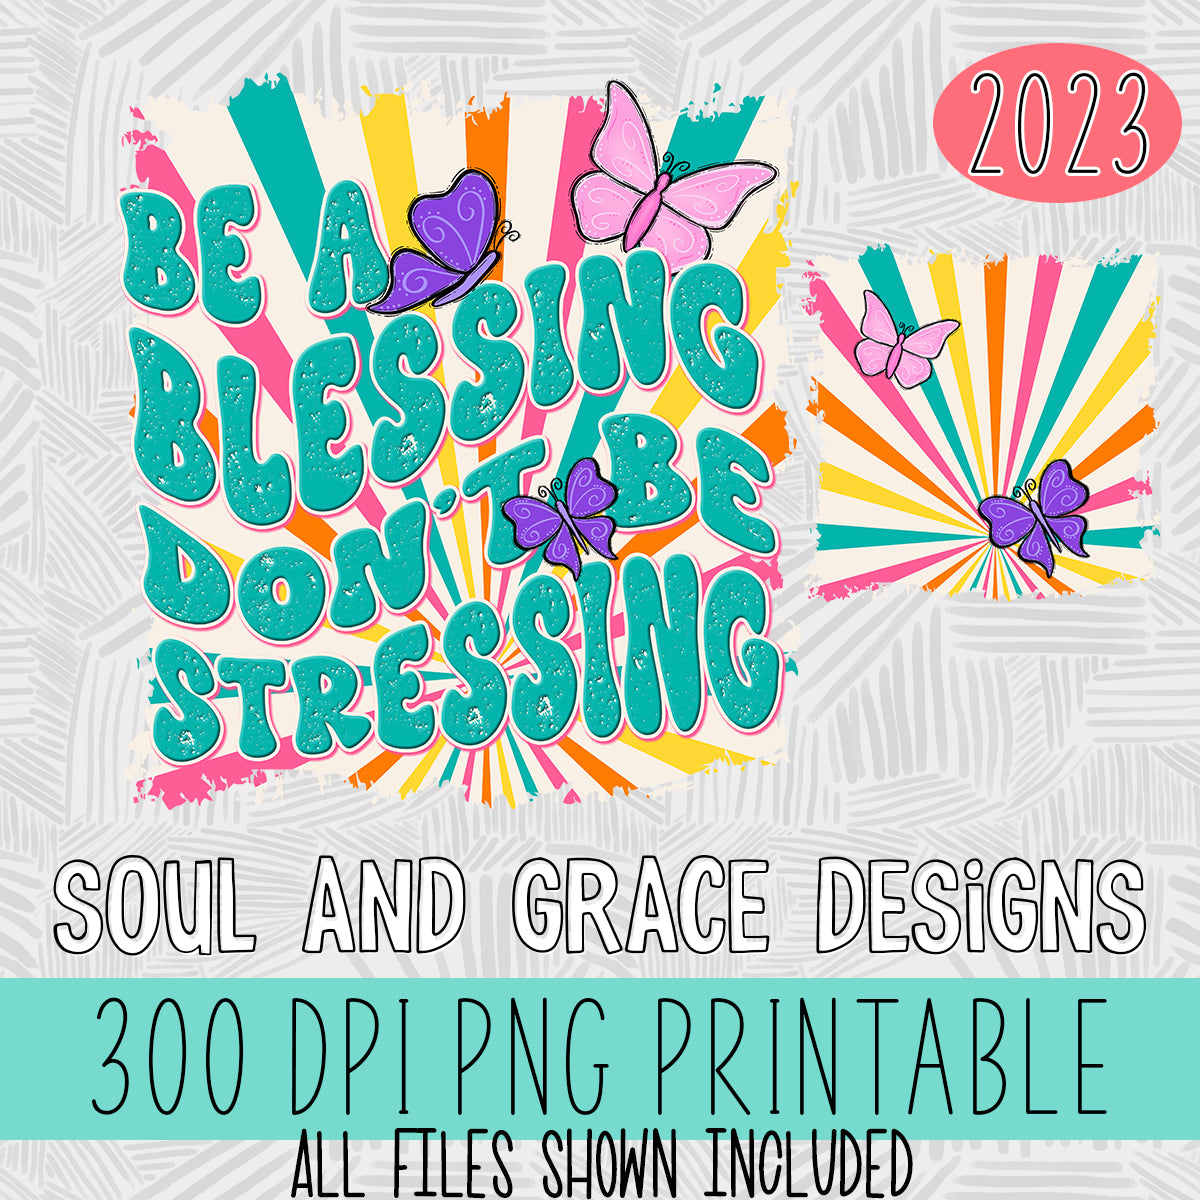 Be A Blessing Don't Be Stressing [with pocket design]